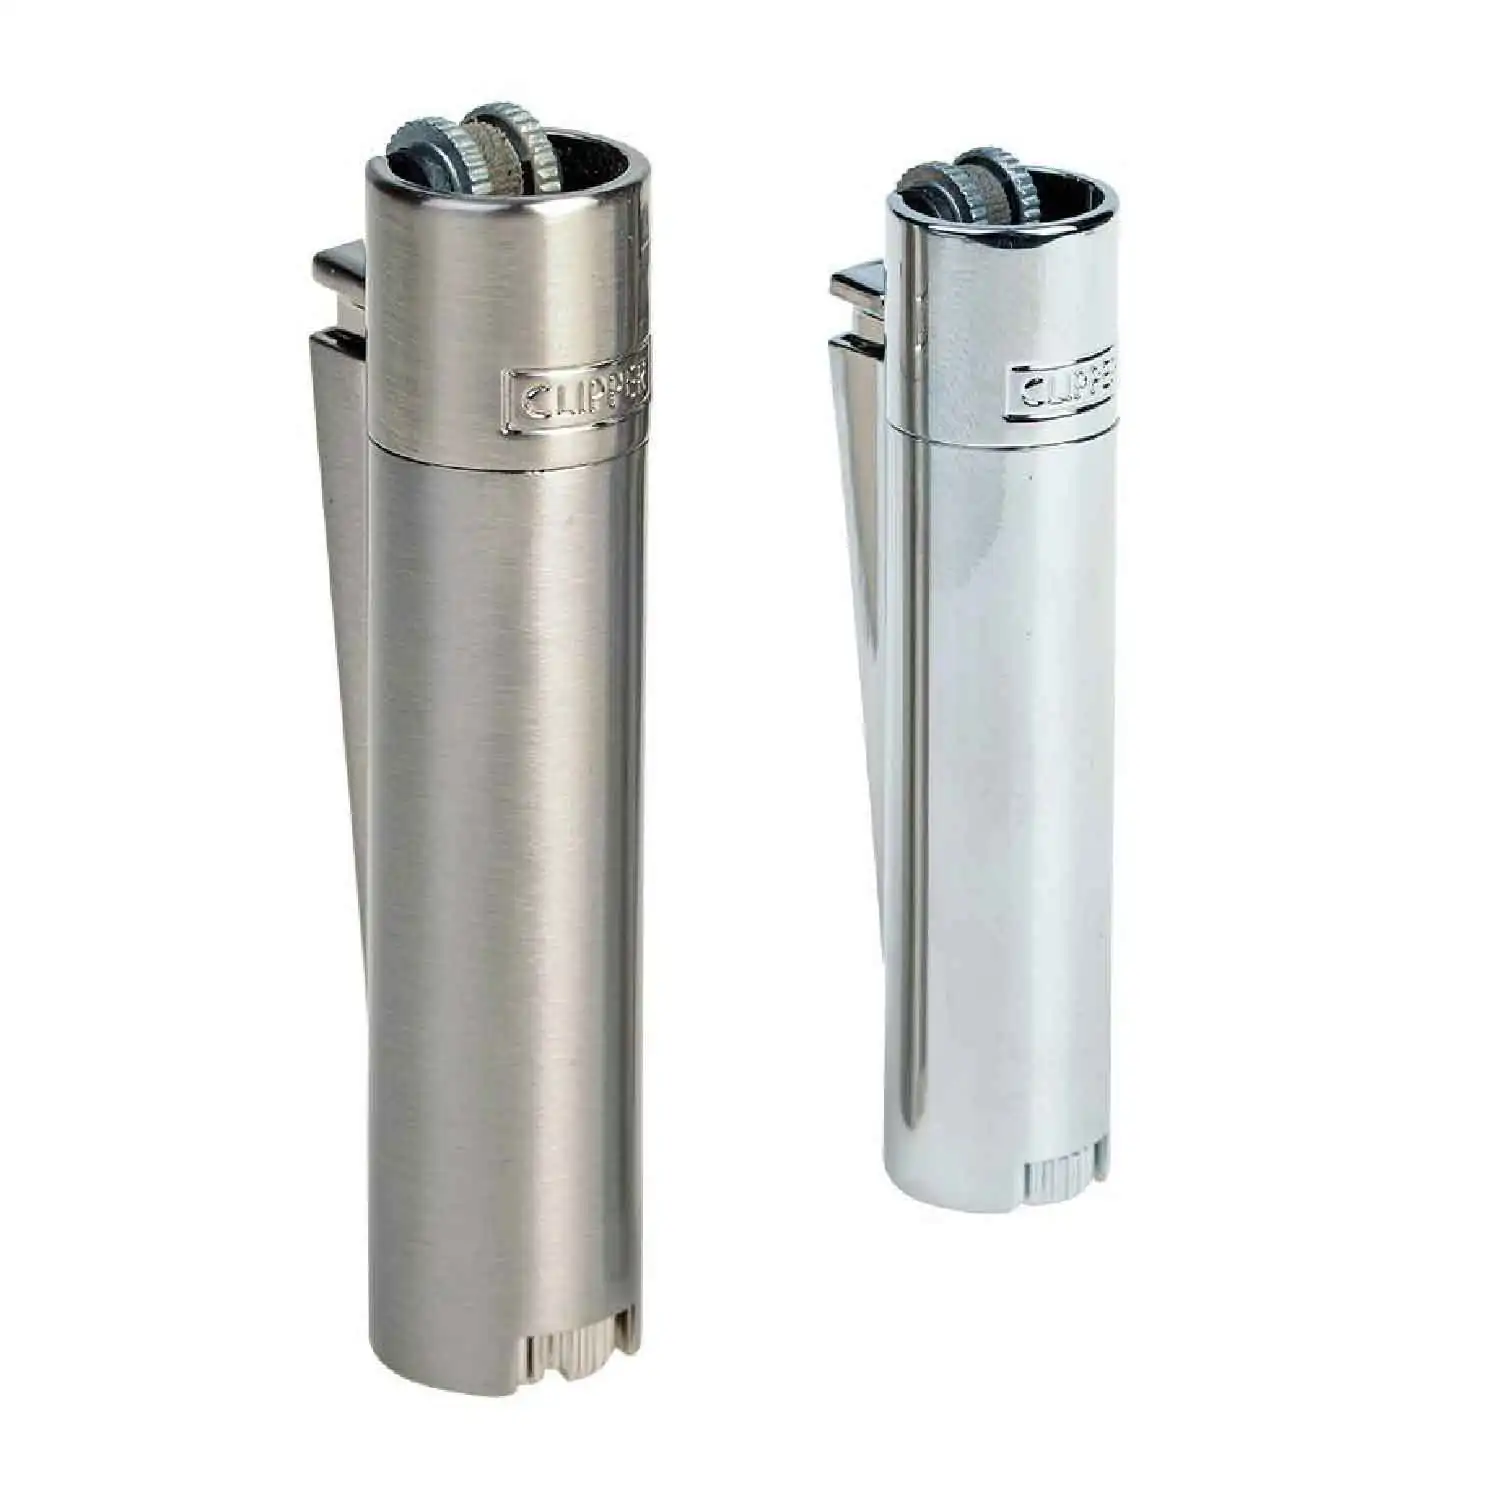 Clipper metal lighter - Buy at Real Tobacco